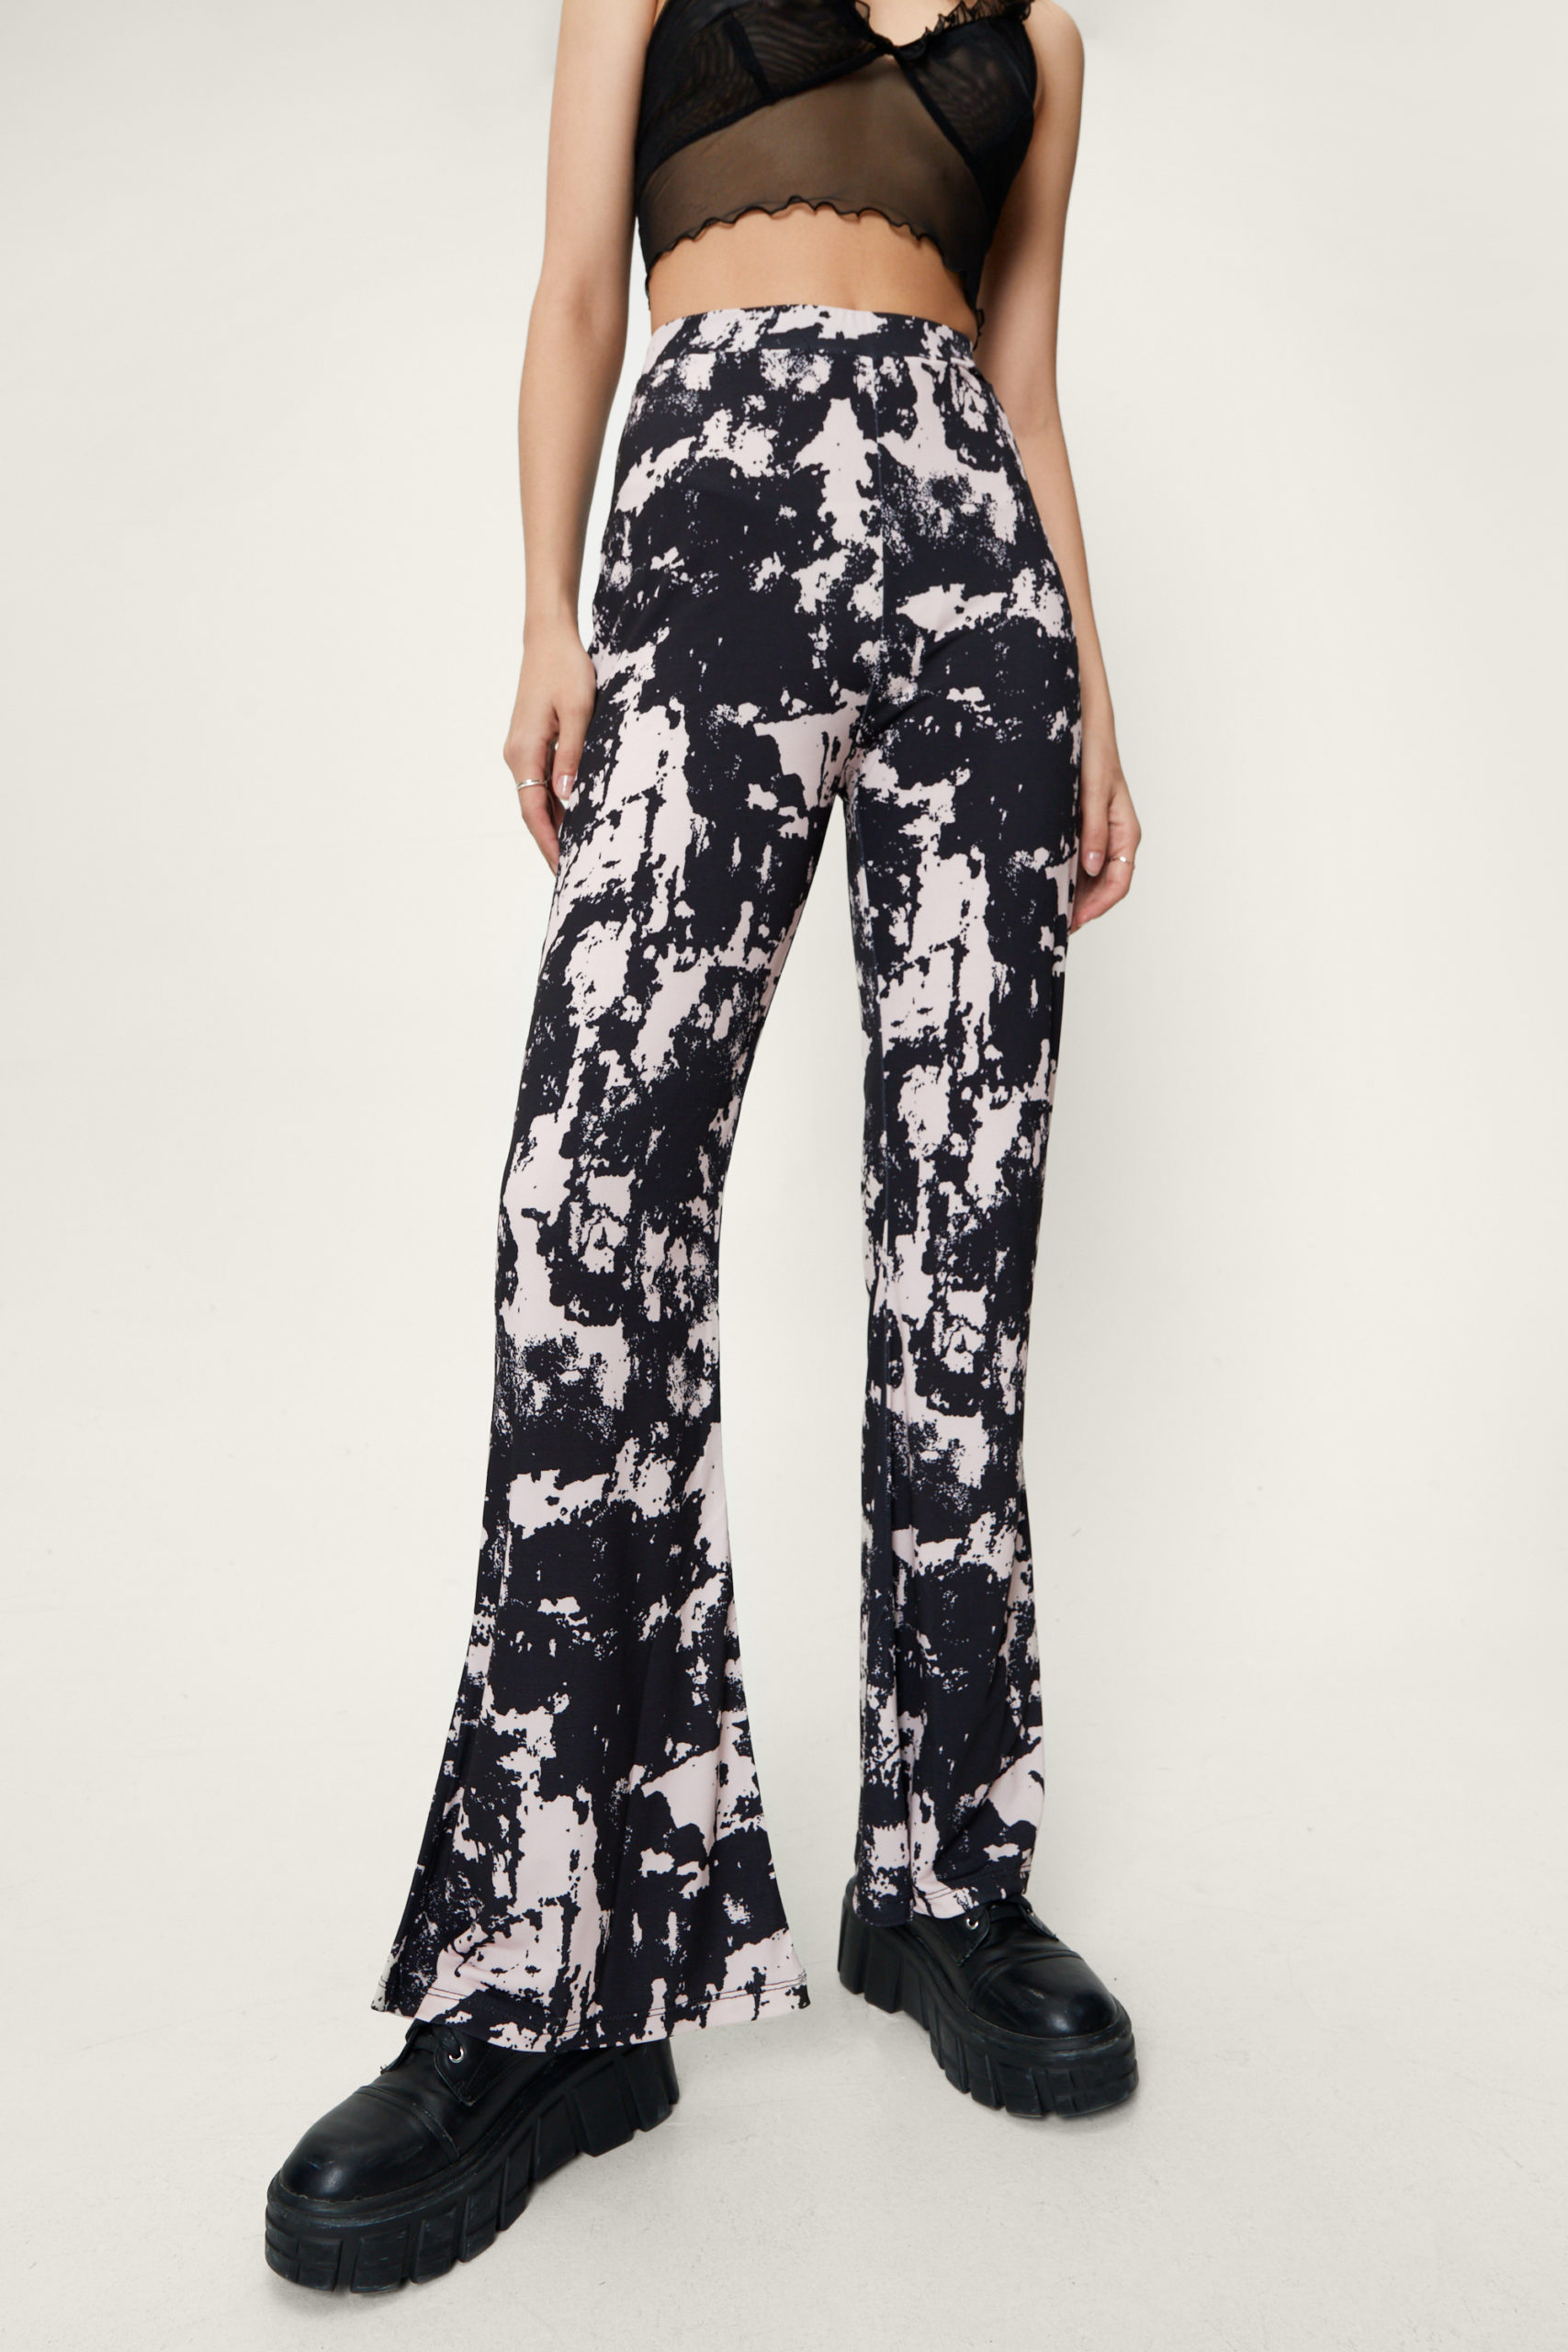 Tie Dye High Waisted Flared Pants